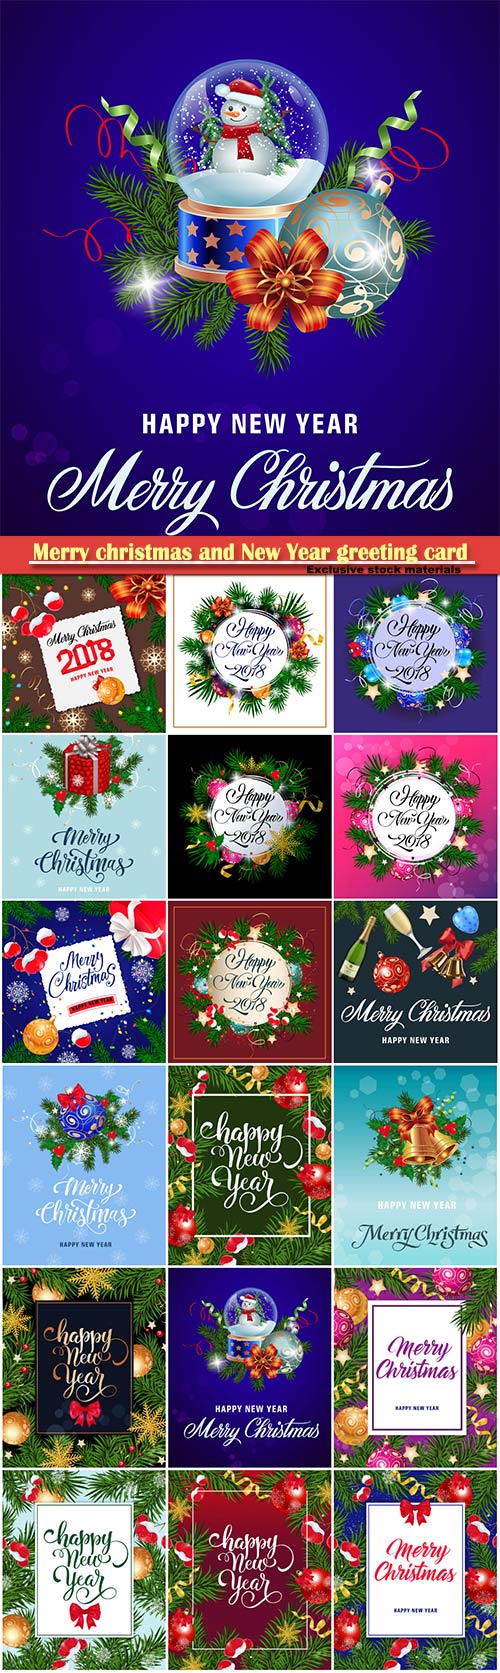 Merry christmas and New Year greeting card vector # 25